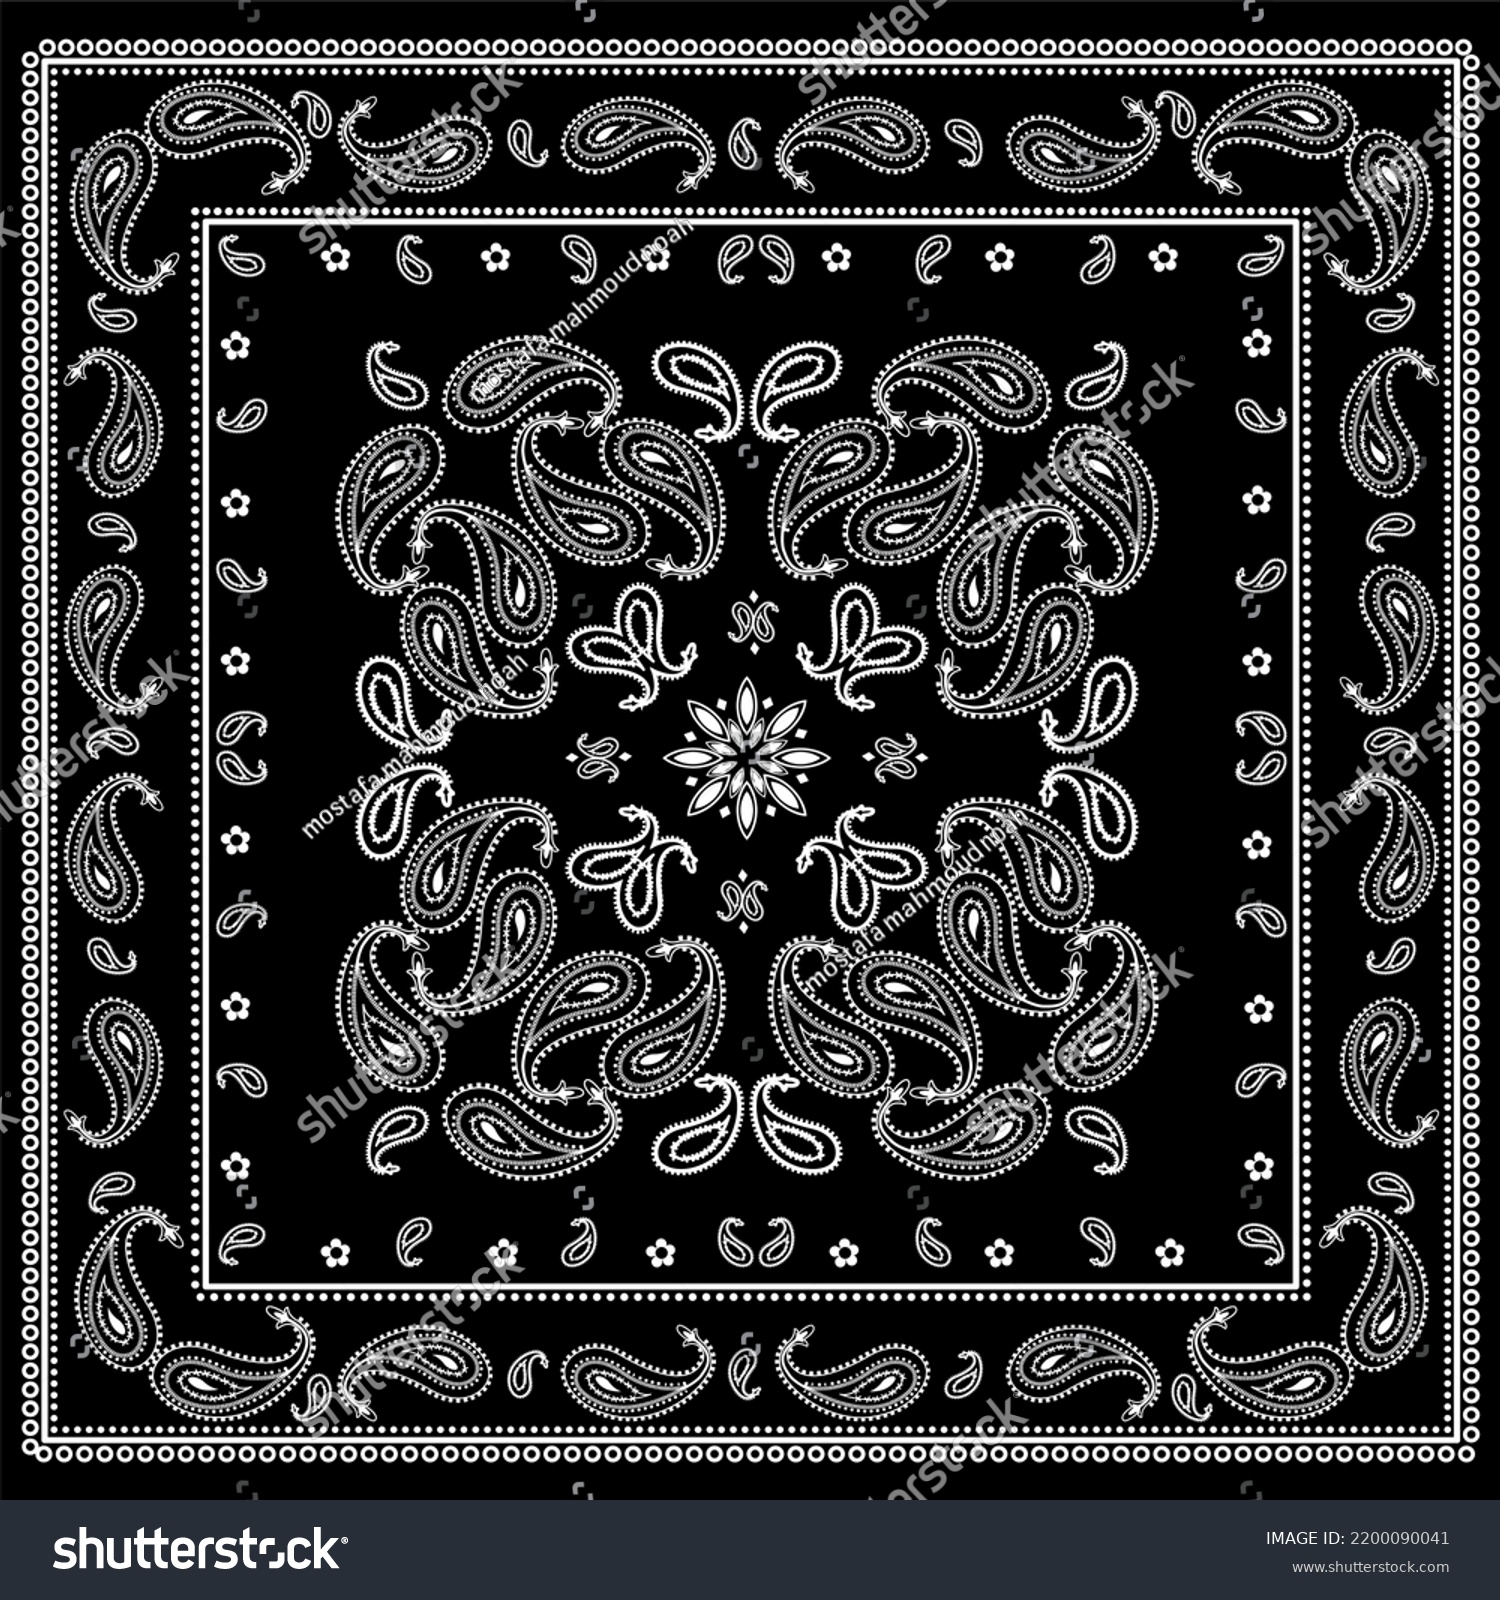 SVG of paisley bandana vector Vector ornament paisley Bandana Print. Silk neck scarf or kerchief square pattern design style, best motive for print on fabric or papper.
 svg